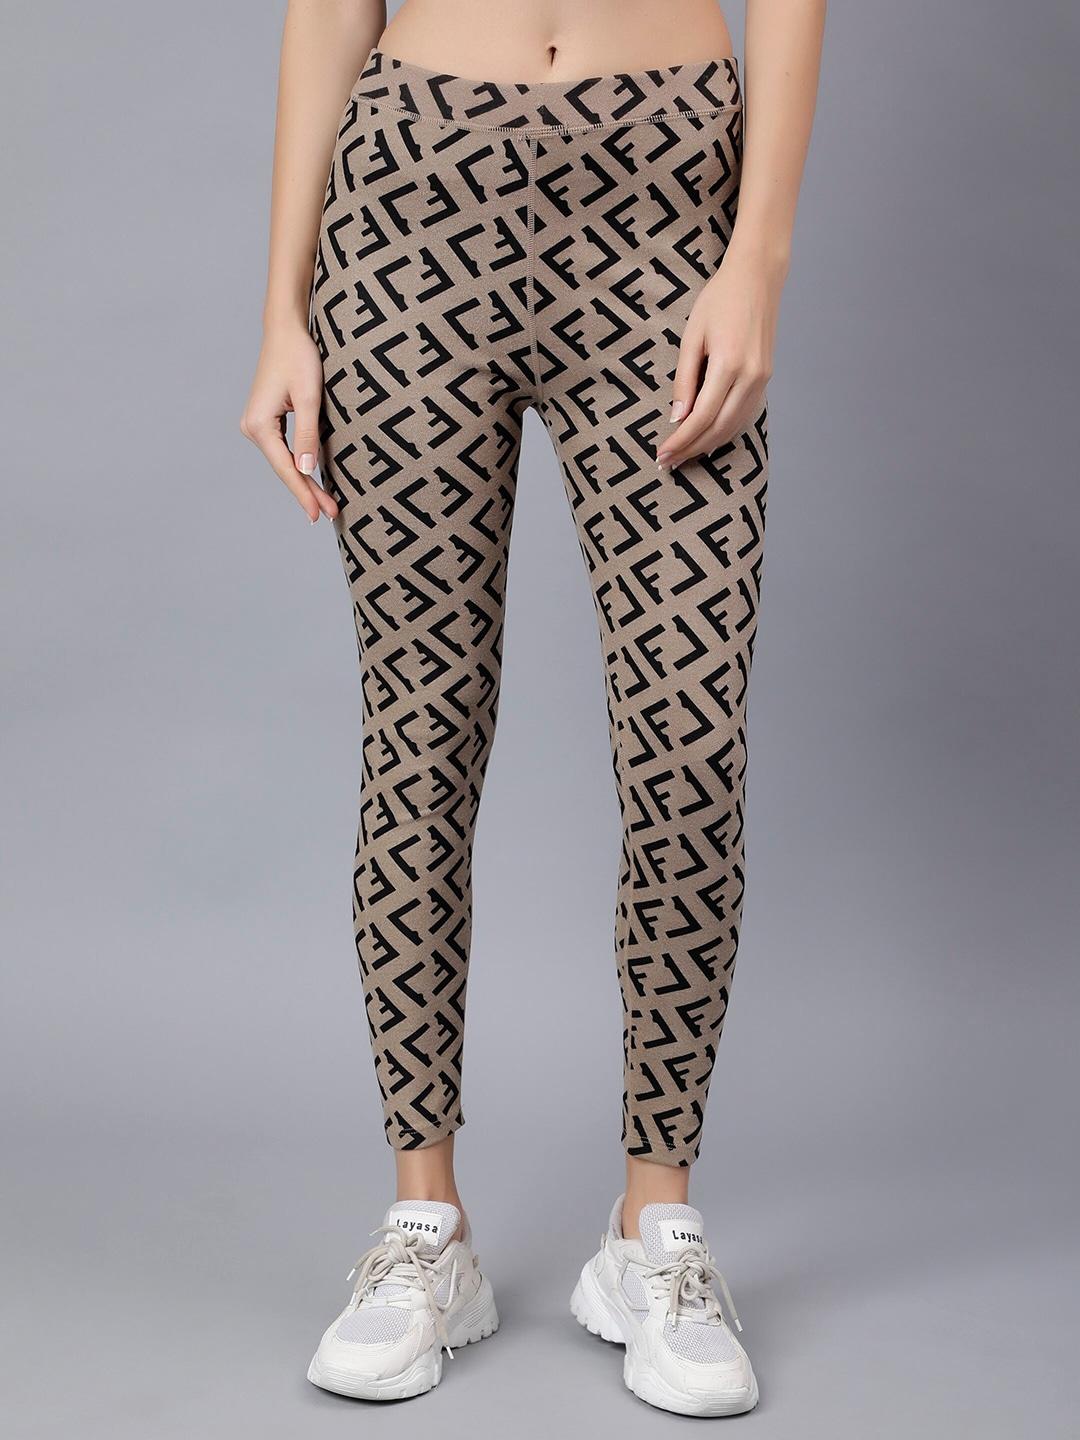 albion-women-geometric-printed-travel-features-mid-rise-pure-cotton-track-pant